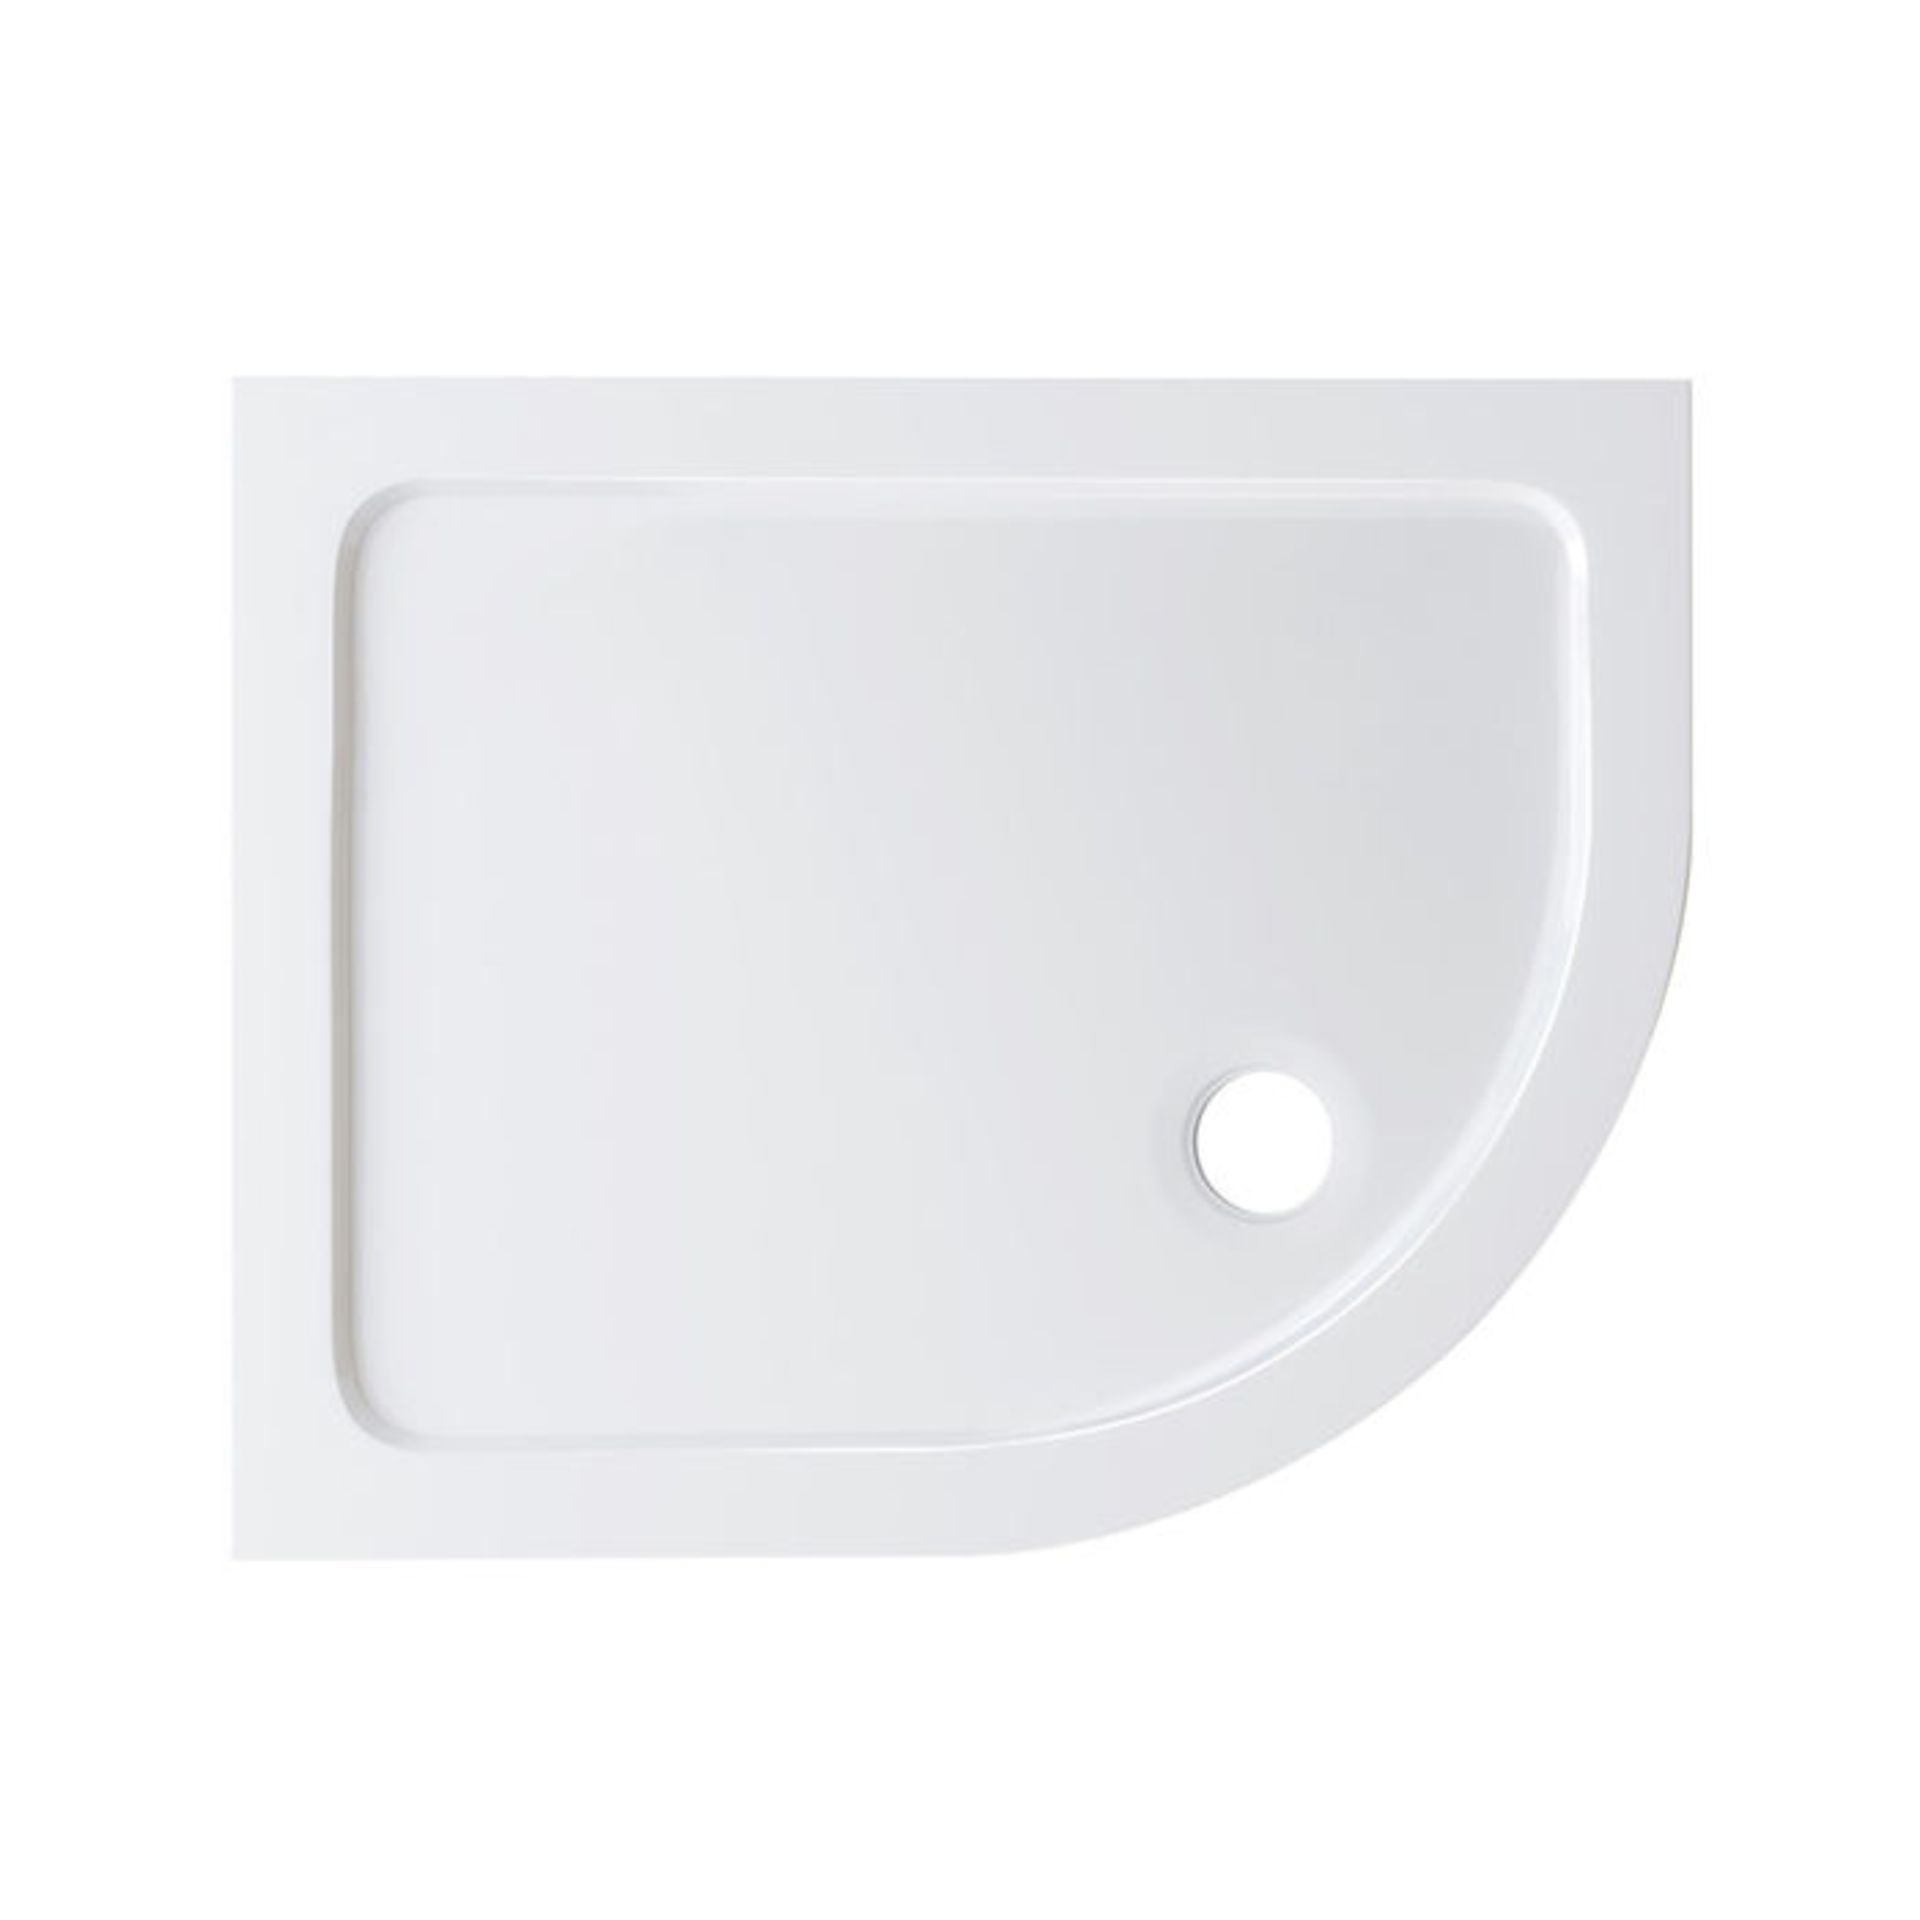 (NY63) 1000x800mm Offset Quadrant Ultra Slim Stone Shower Tray - Right. RRP £249.99. Low profile